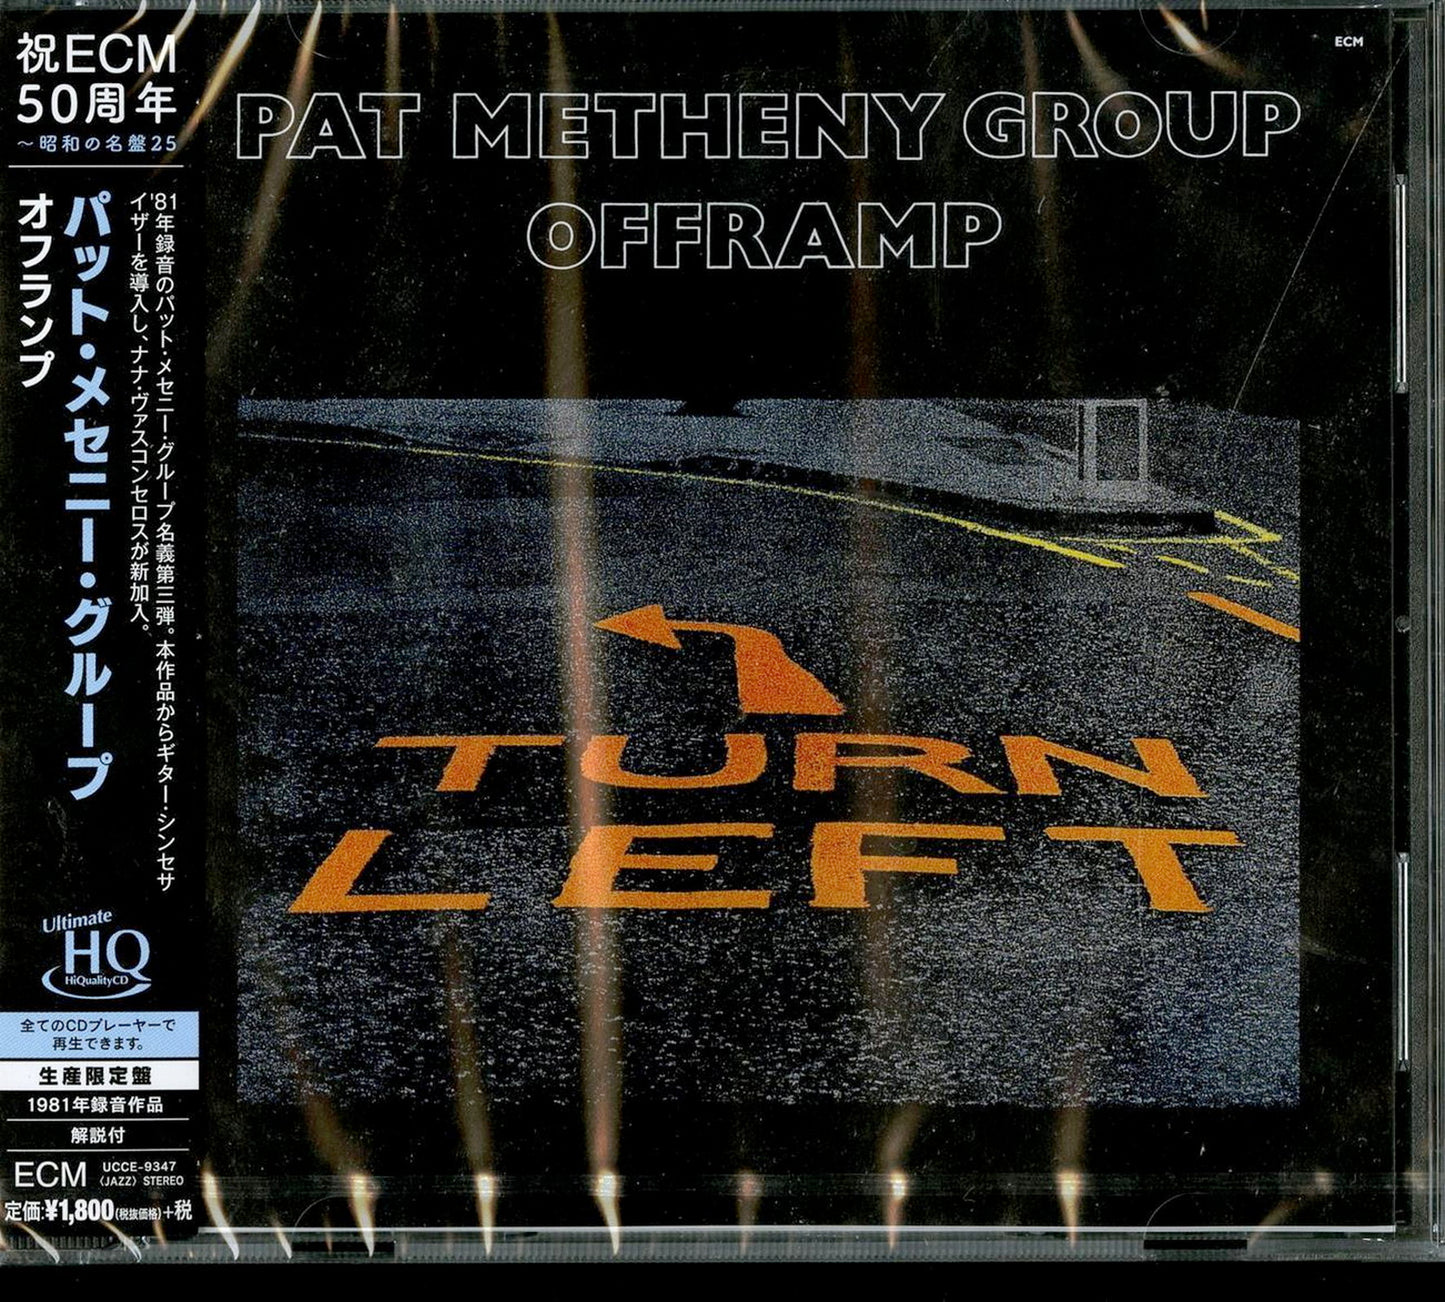 Pat Metheny Group - Offramp - UHQCD Limited Edition